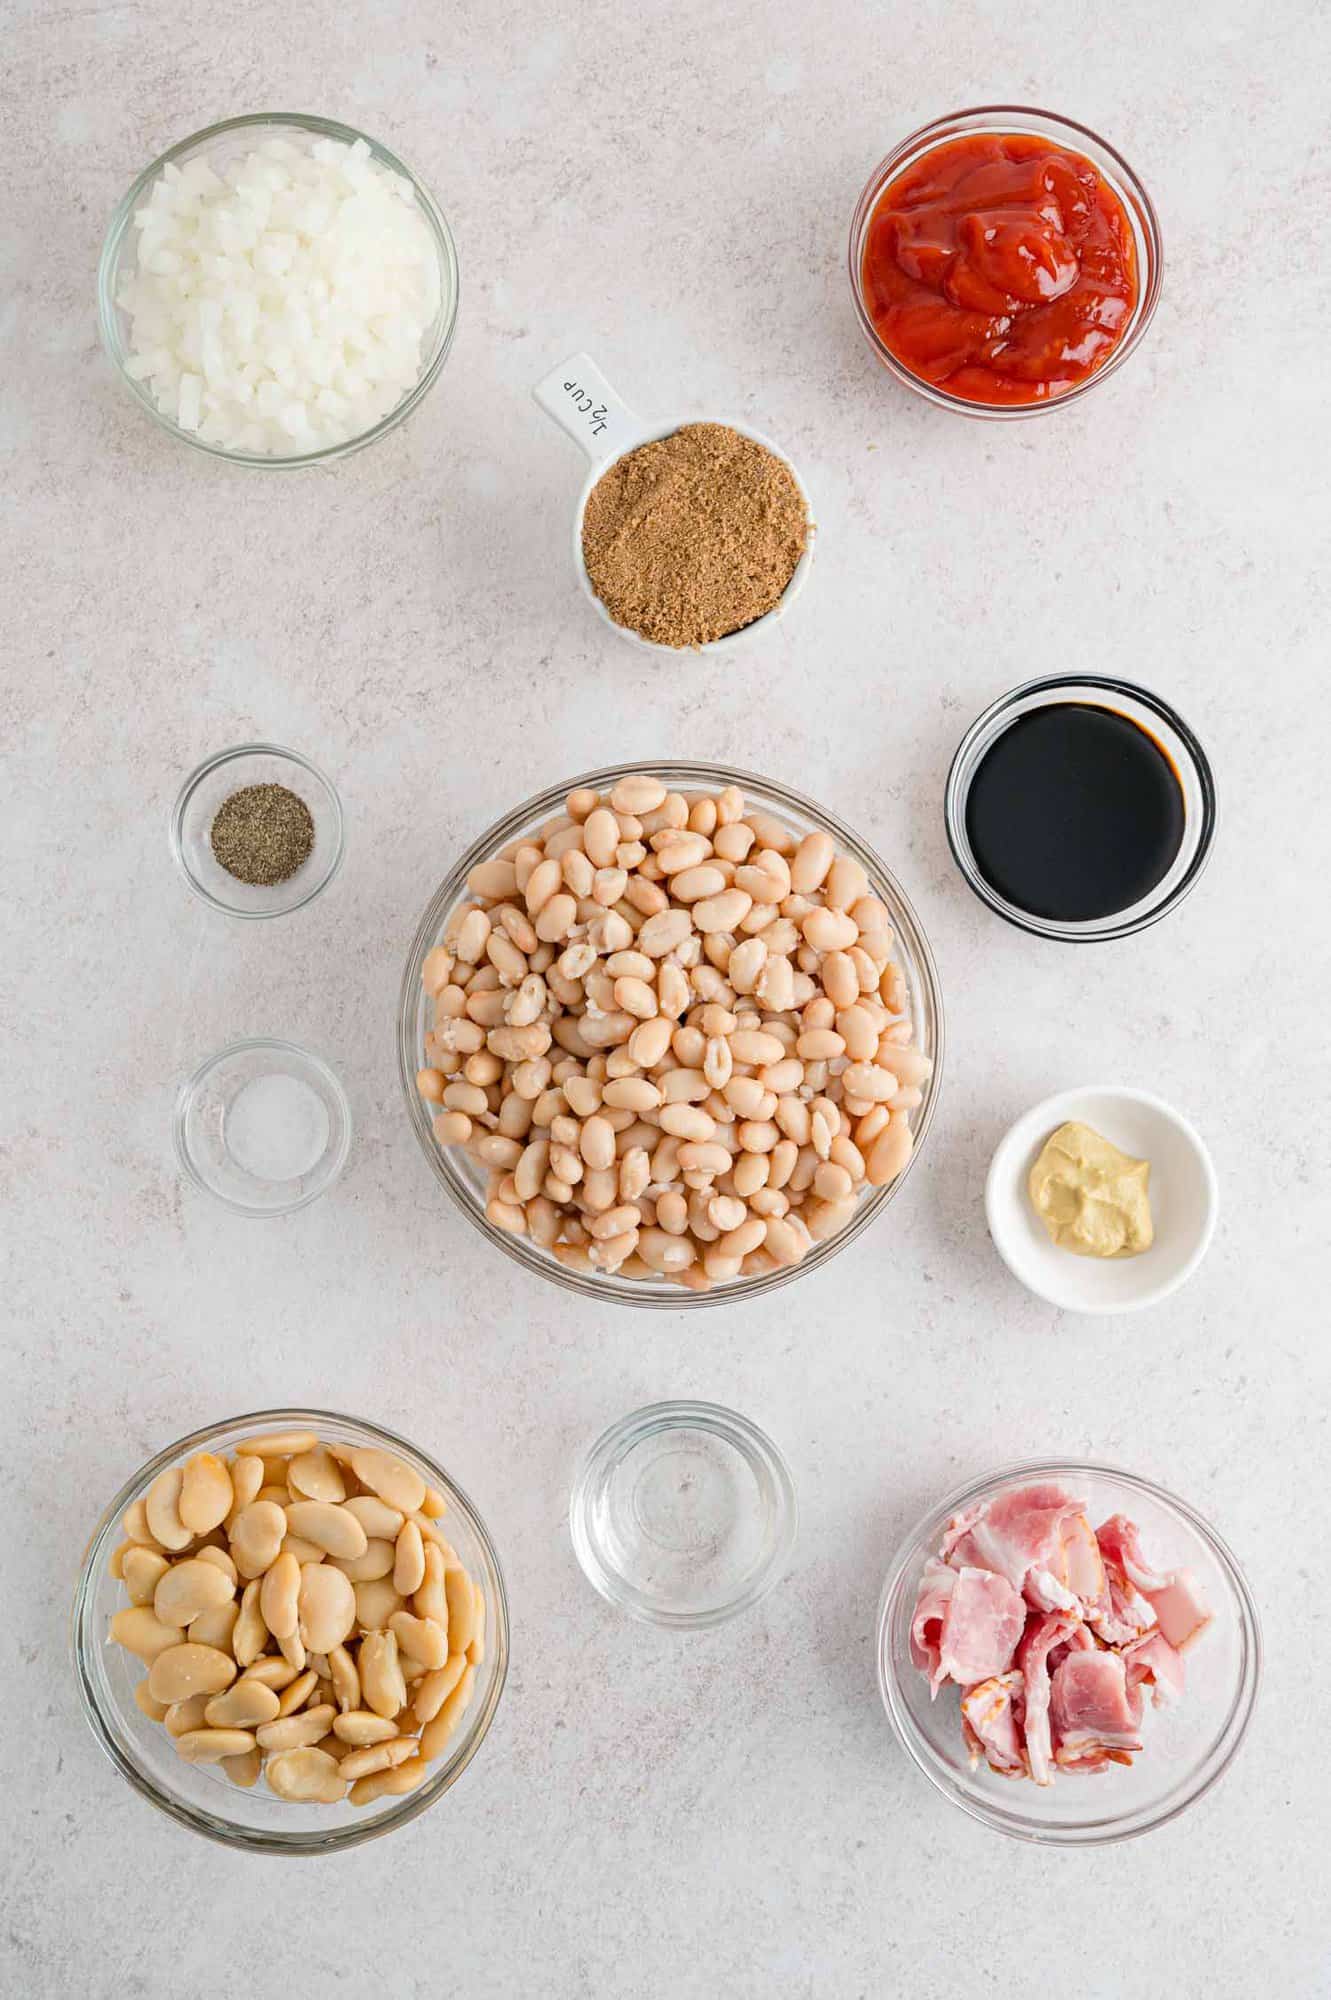 Overhead view of ingredients including beans, bacon, and brown sugar.